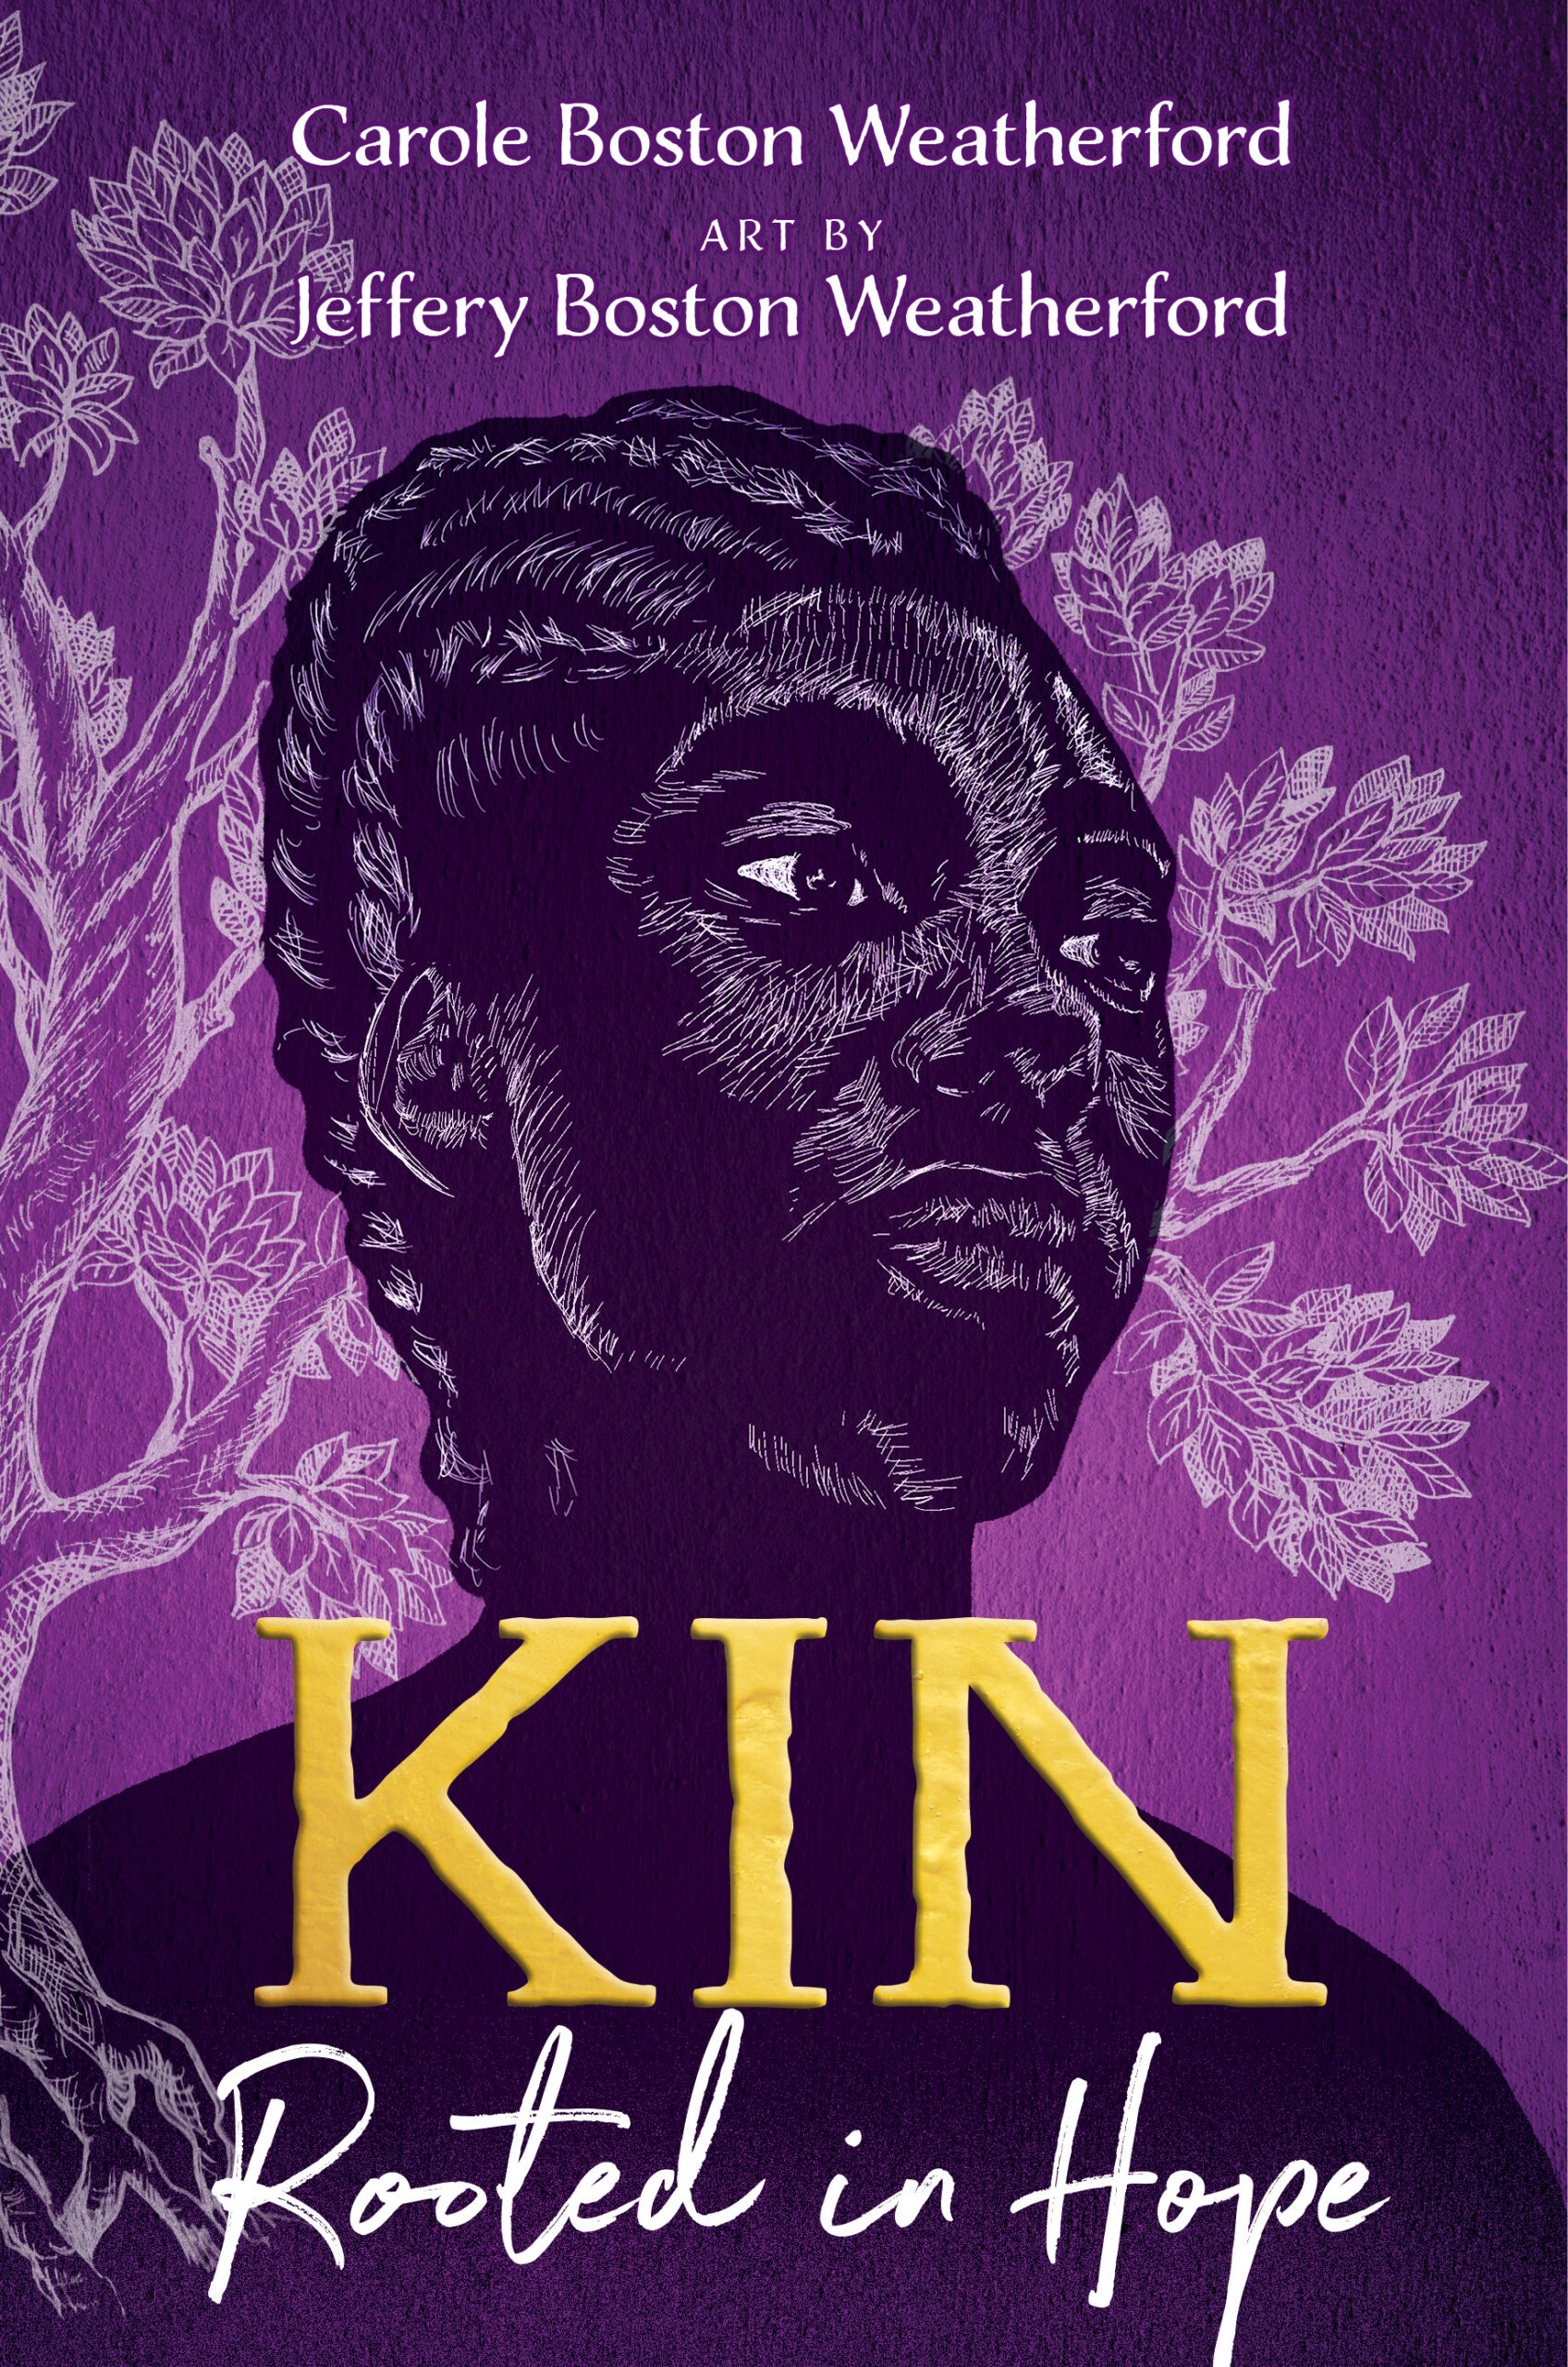 Restoring What Slavery Took Away: Ten Take-aways from Kin: Rooted in Hope, a guest post by Carole Boston Weatherford